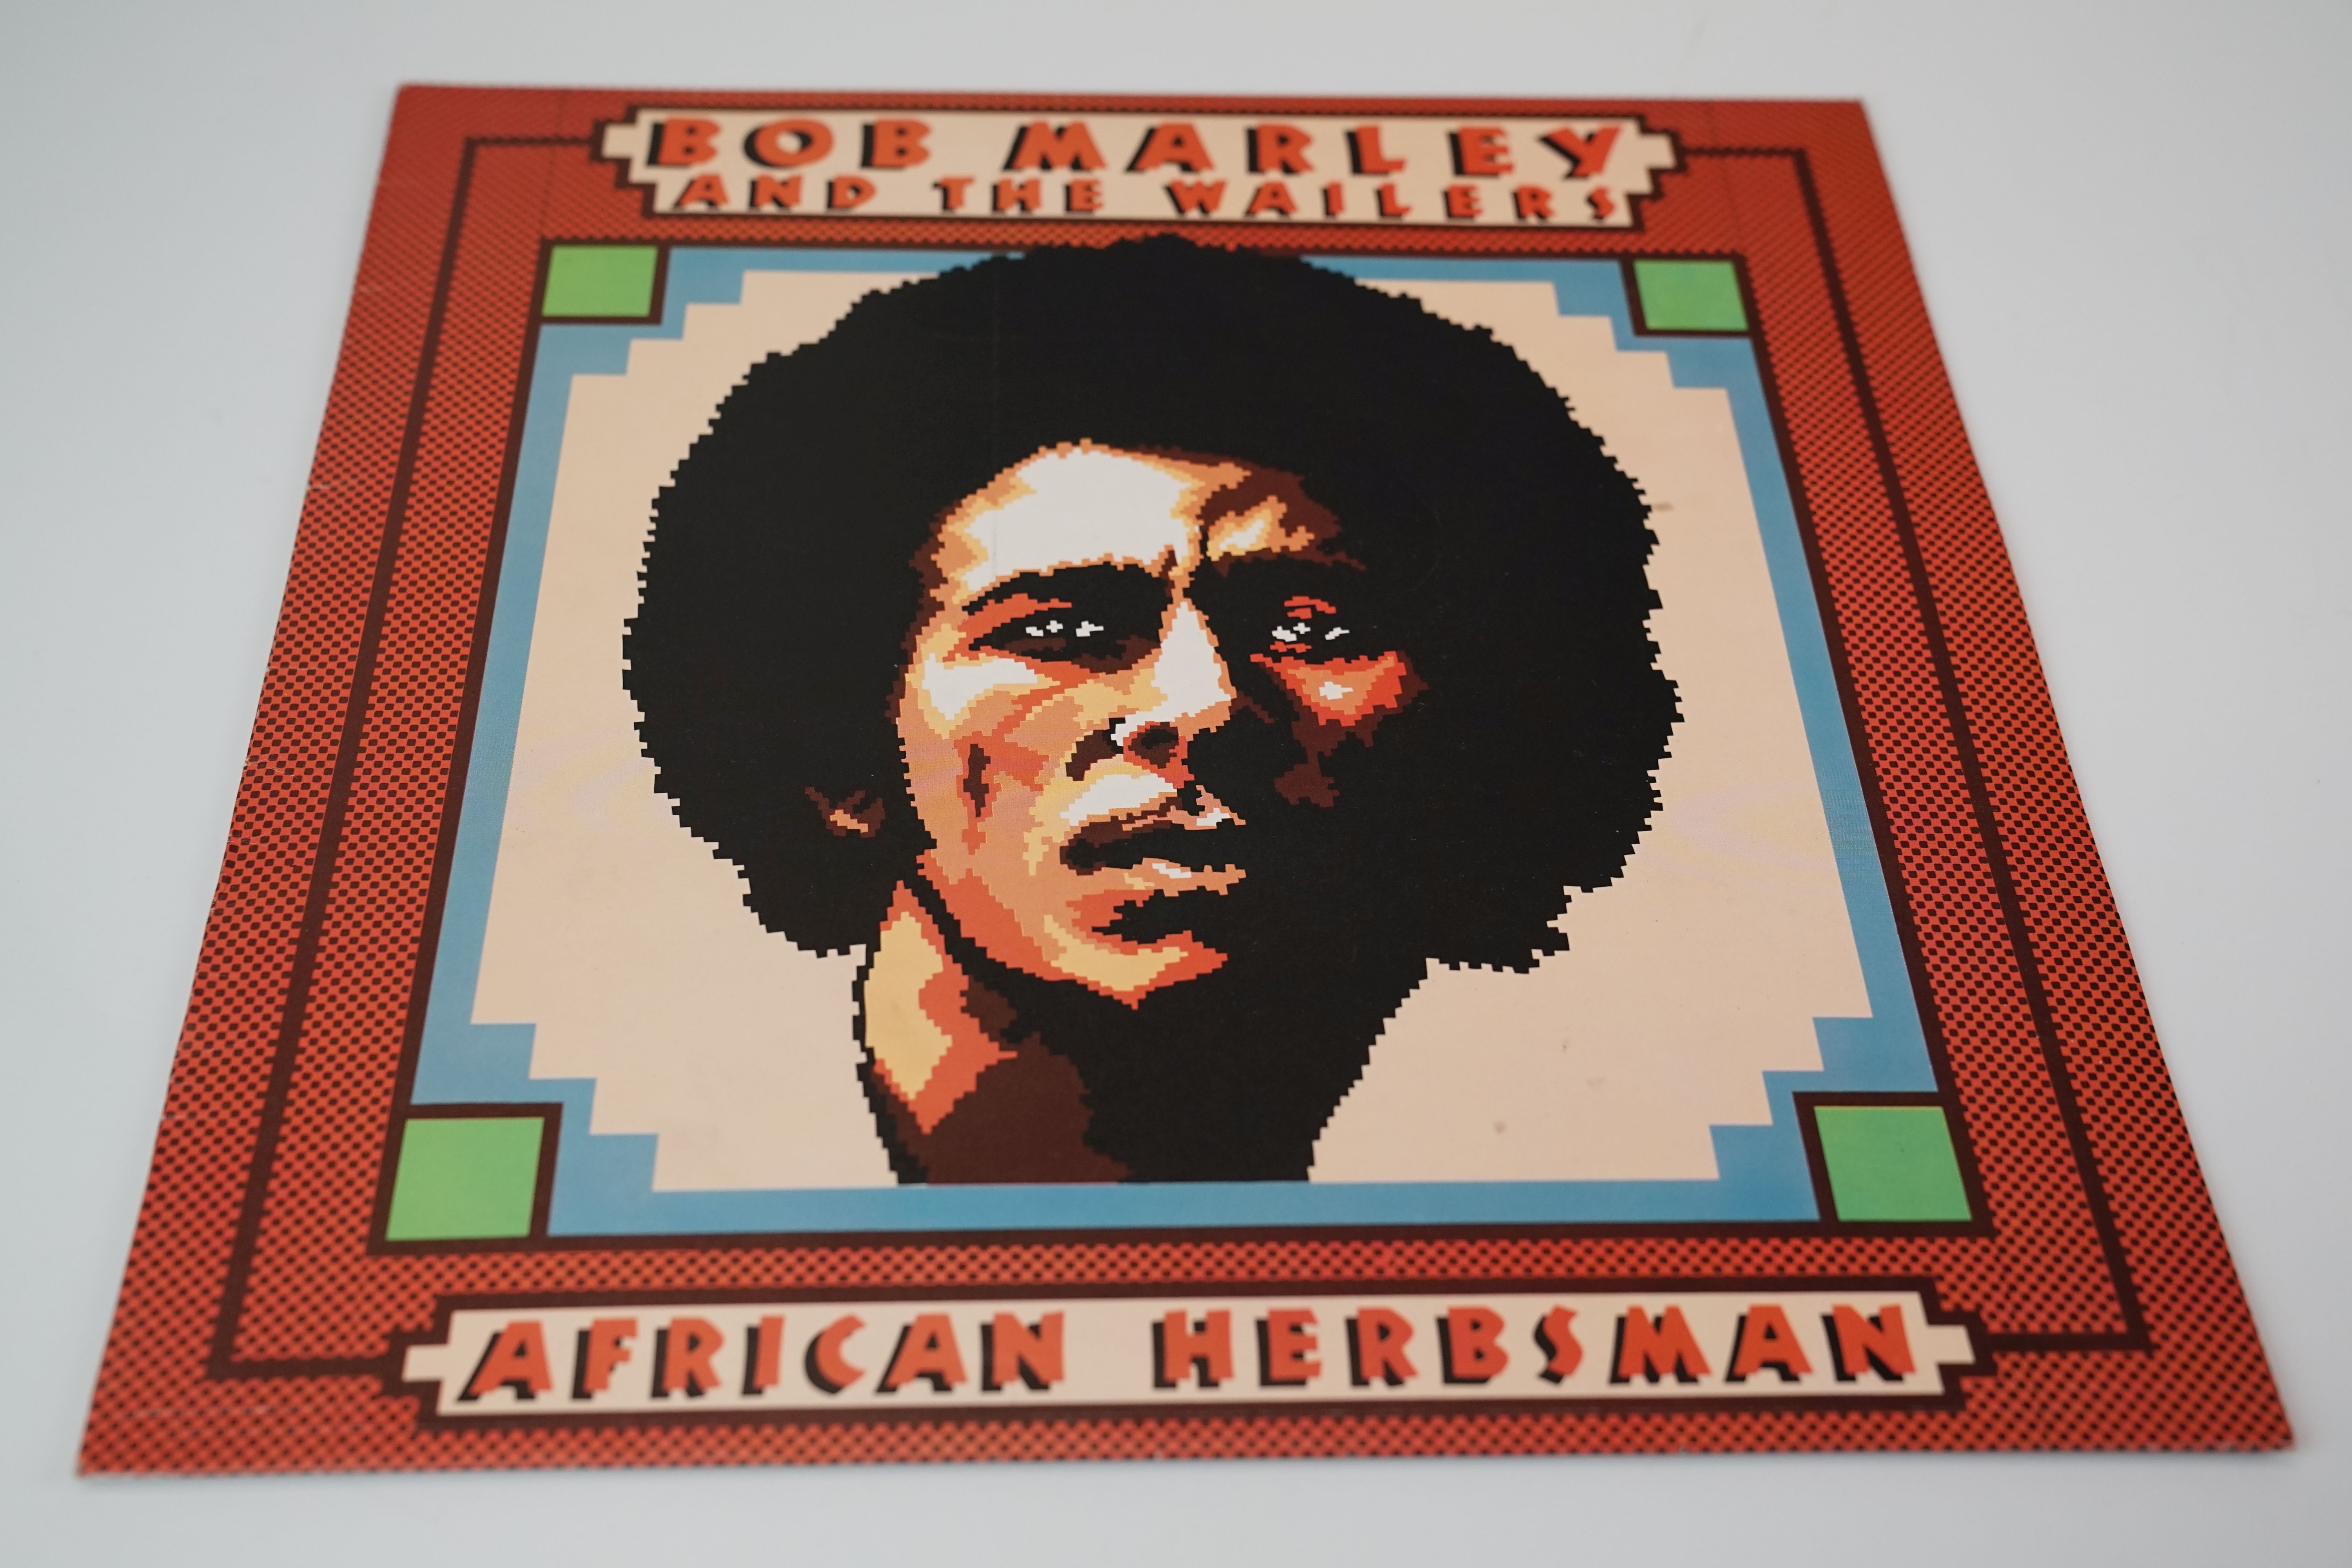 Vinyl - Small collection of 6 Bob Marley LPs to include Uprising, A Friction Herbsman, Natty - Image 2 of 39